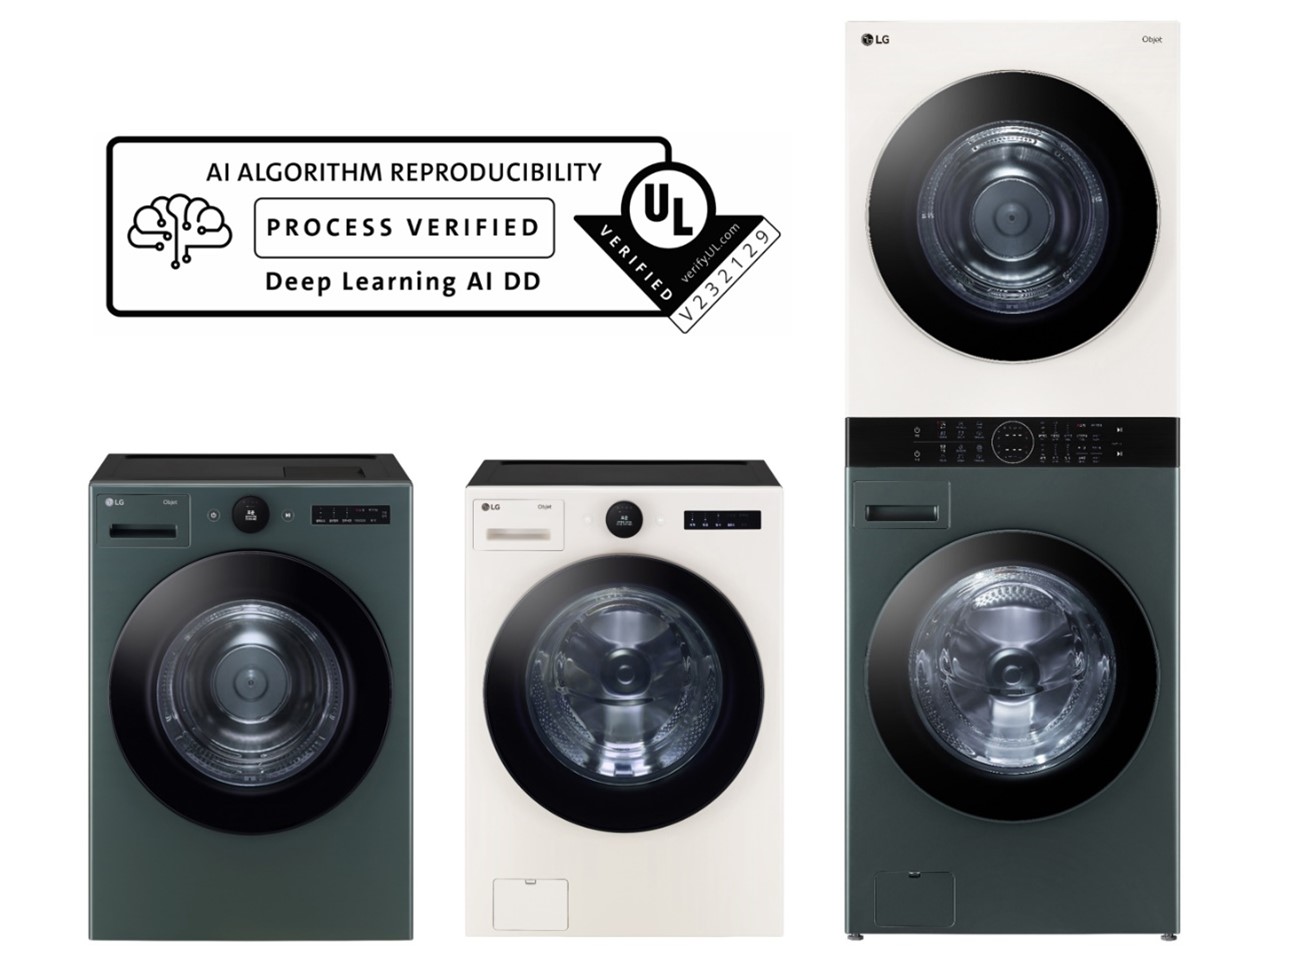 LG’s laundry appliances equipped with Artificial Intelligence Direct Drive (AI DDTM) technology received AI Algorithm Reproducibility Process Verification from UL